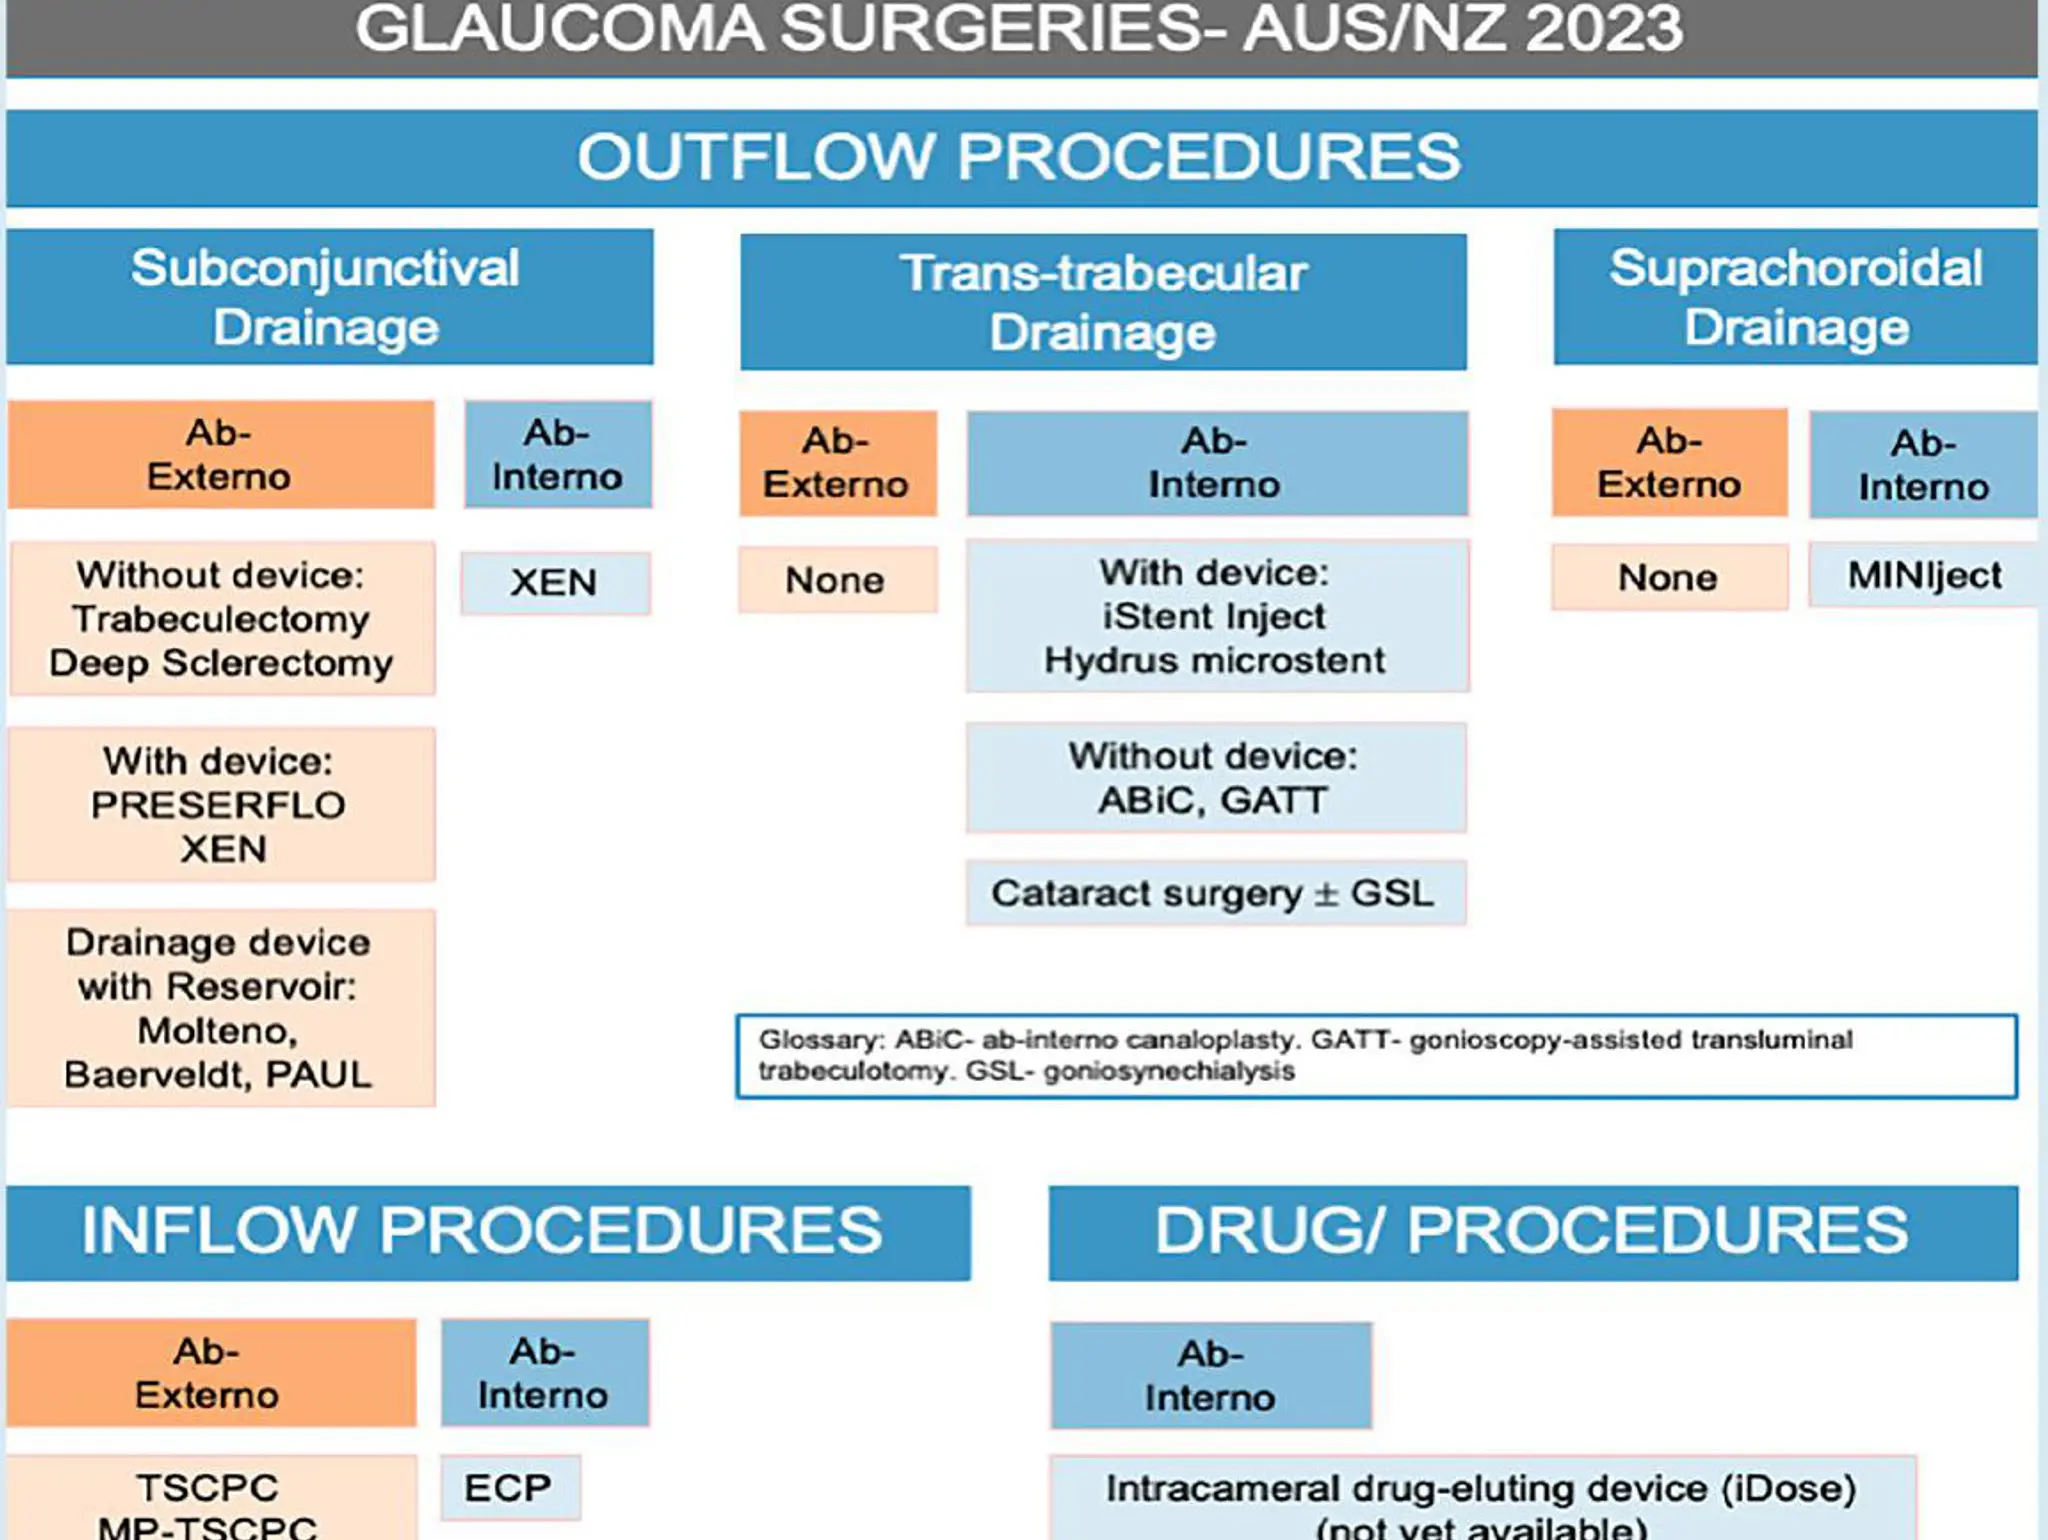 Surgical Management of Glaucoma in 2023: What’s New & What’s Still Working